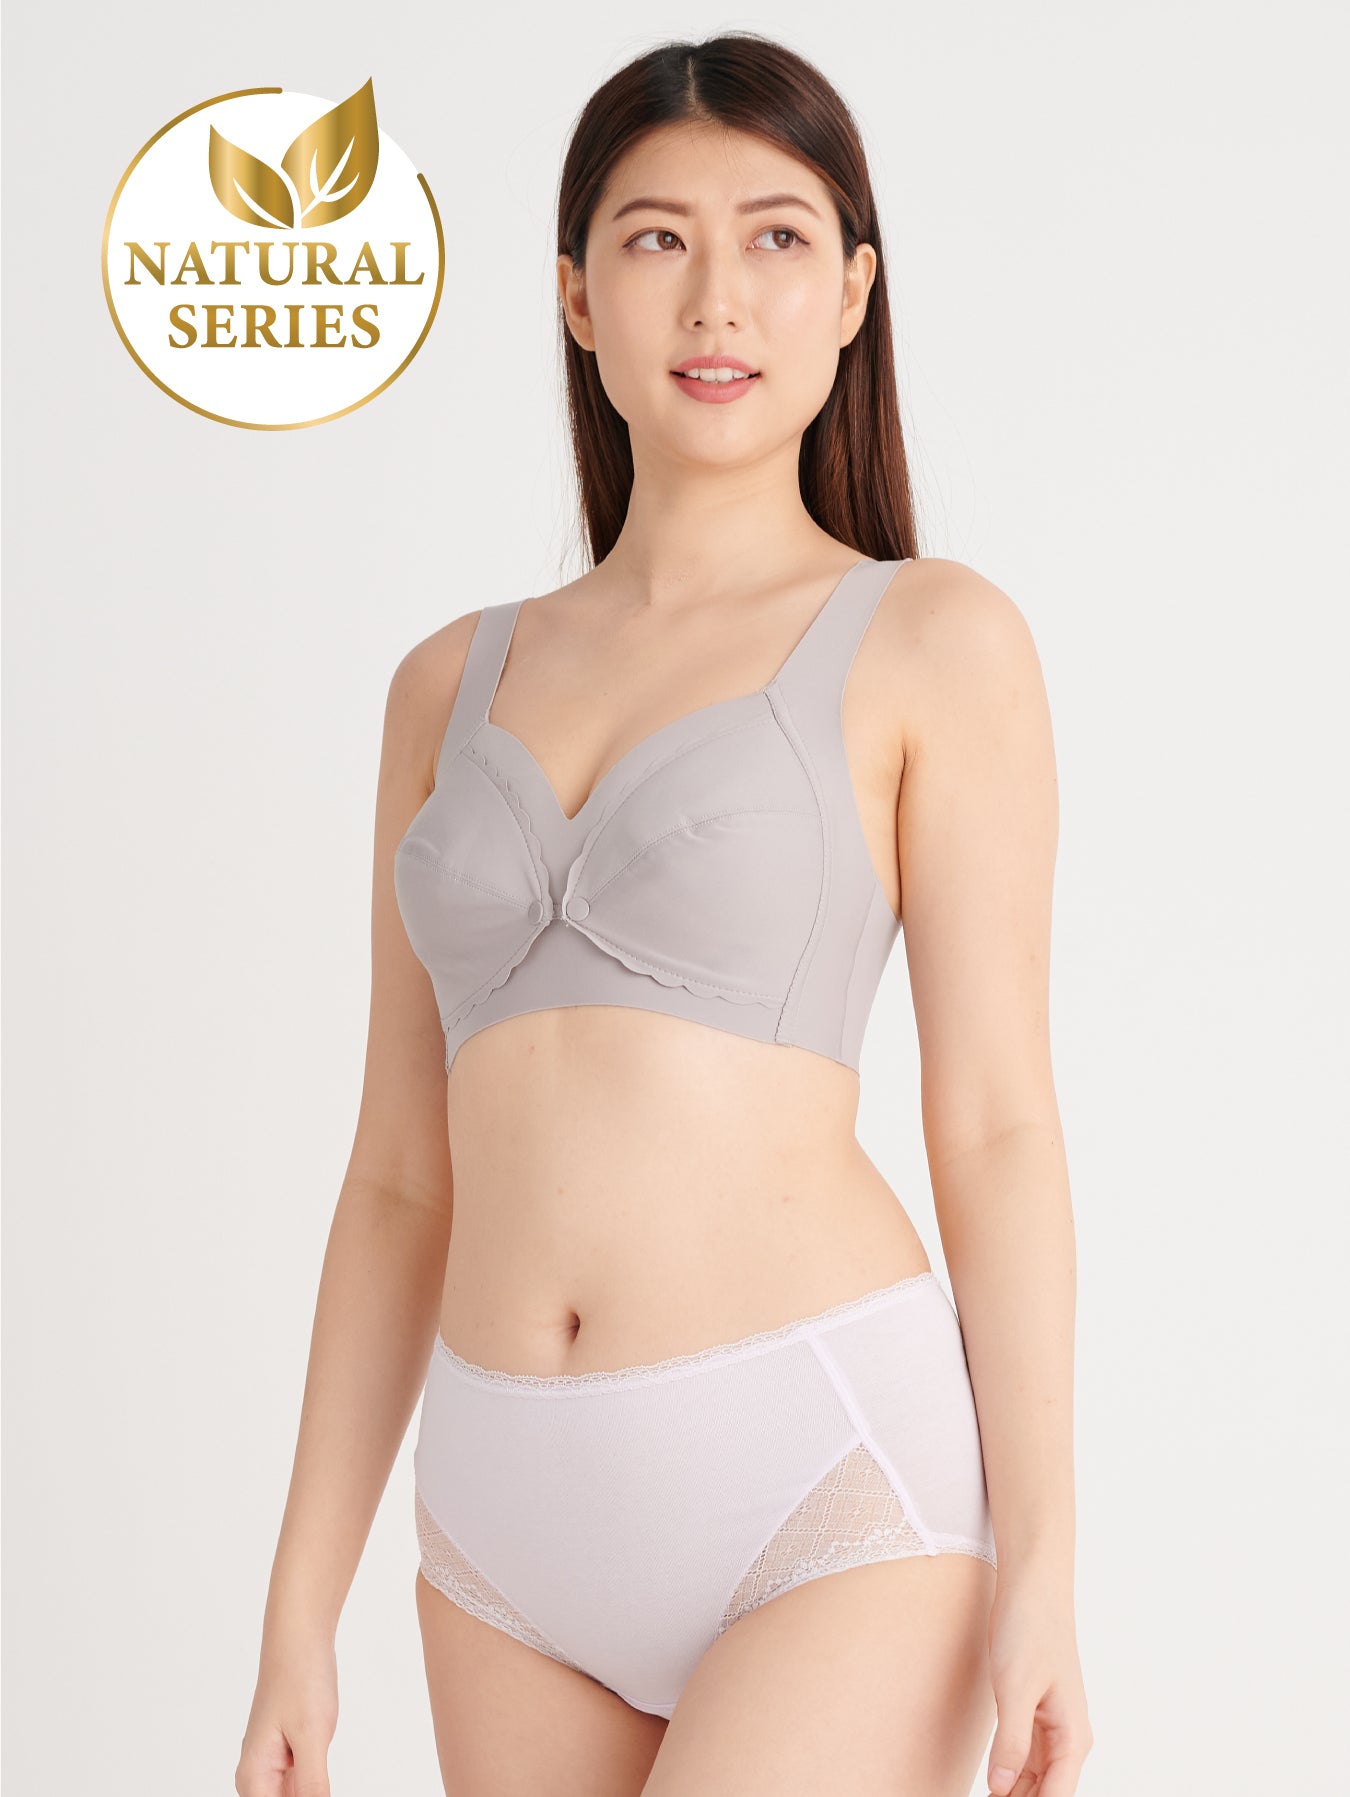 women front button bra - Buy women front button bra at Best Price in  Malaysia